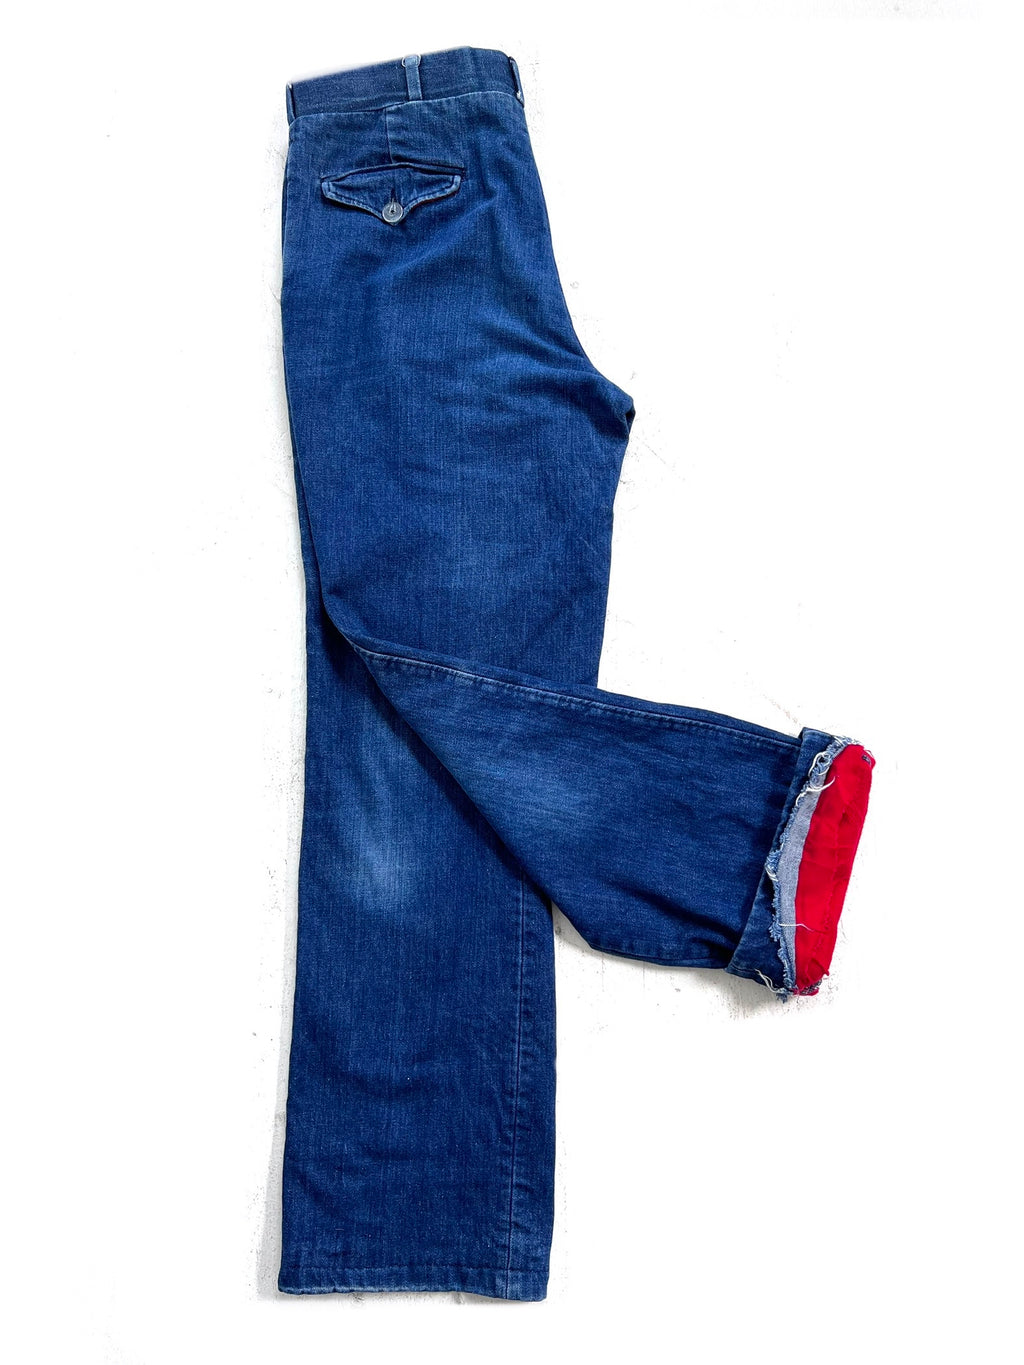 Flannel Lined Denim Trousers